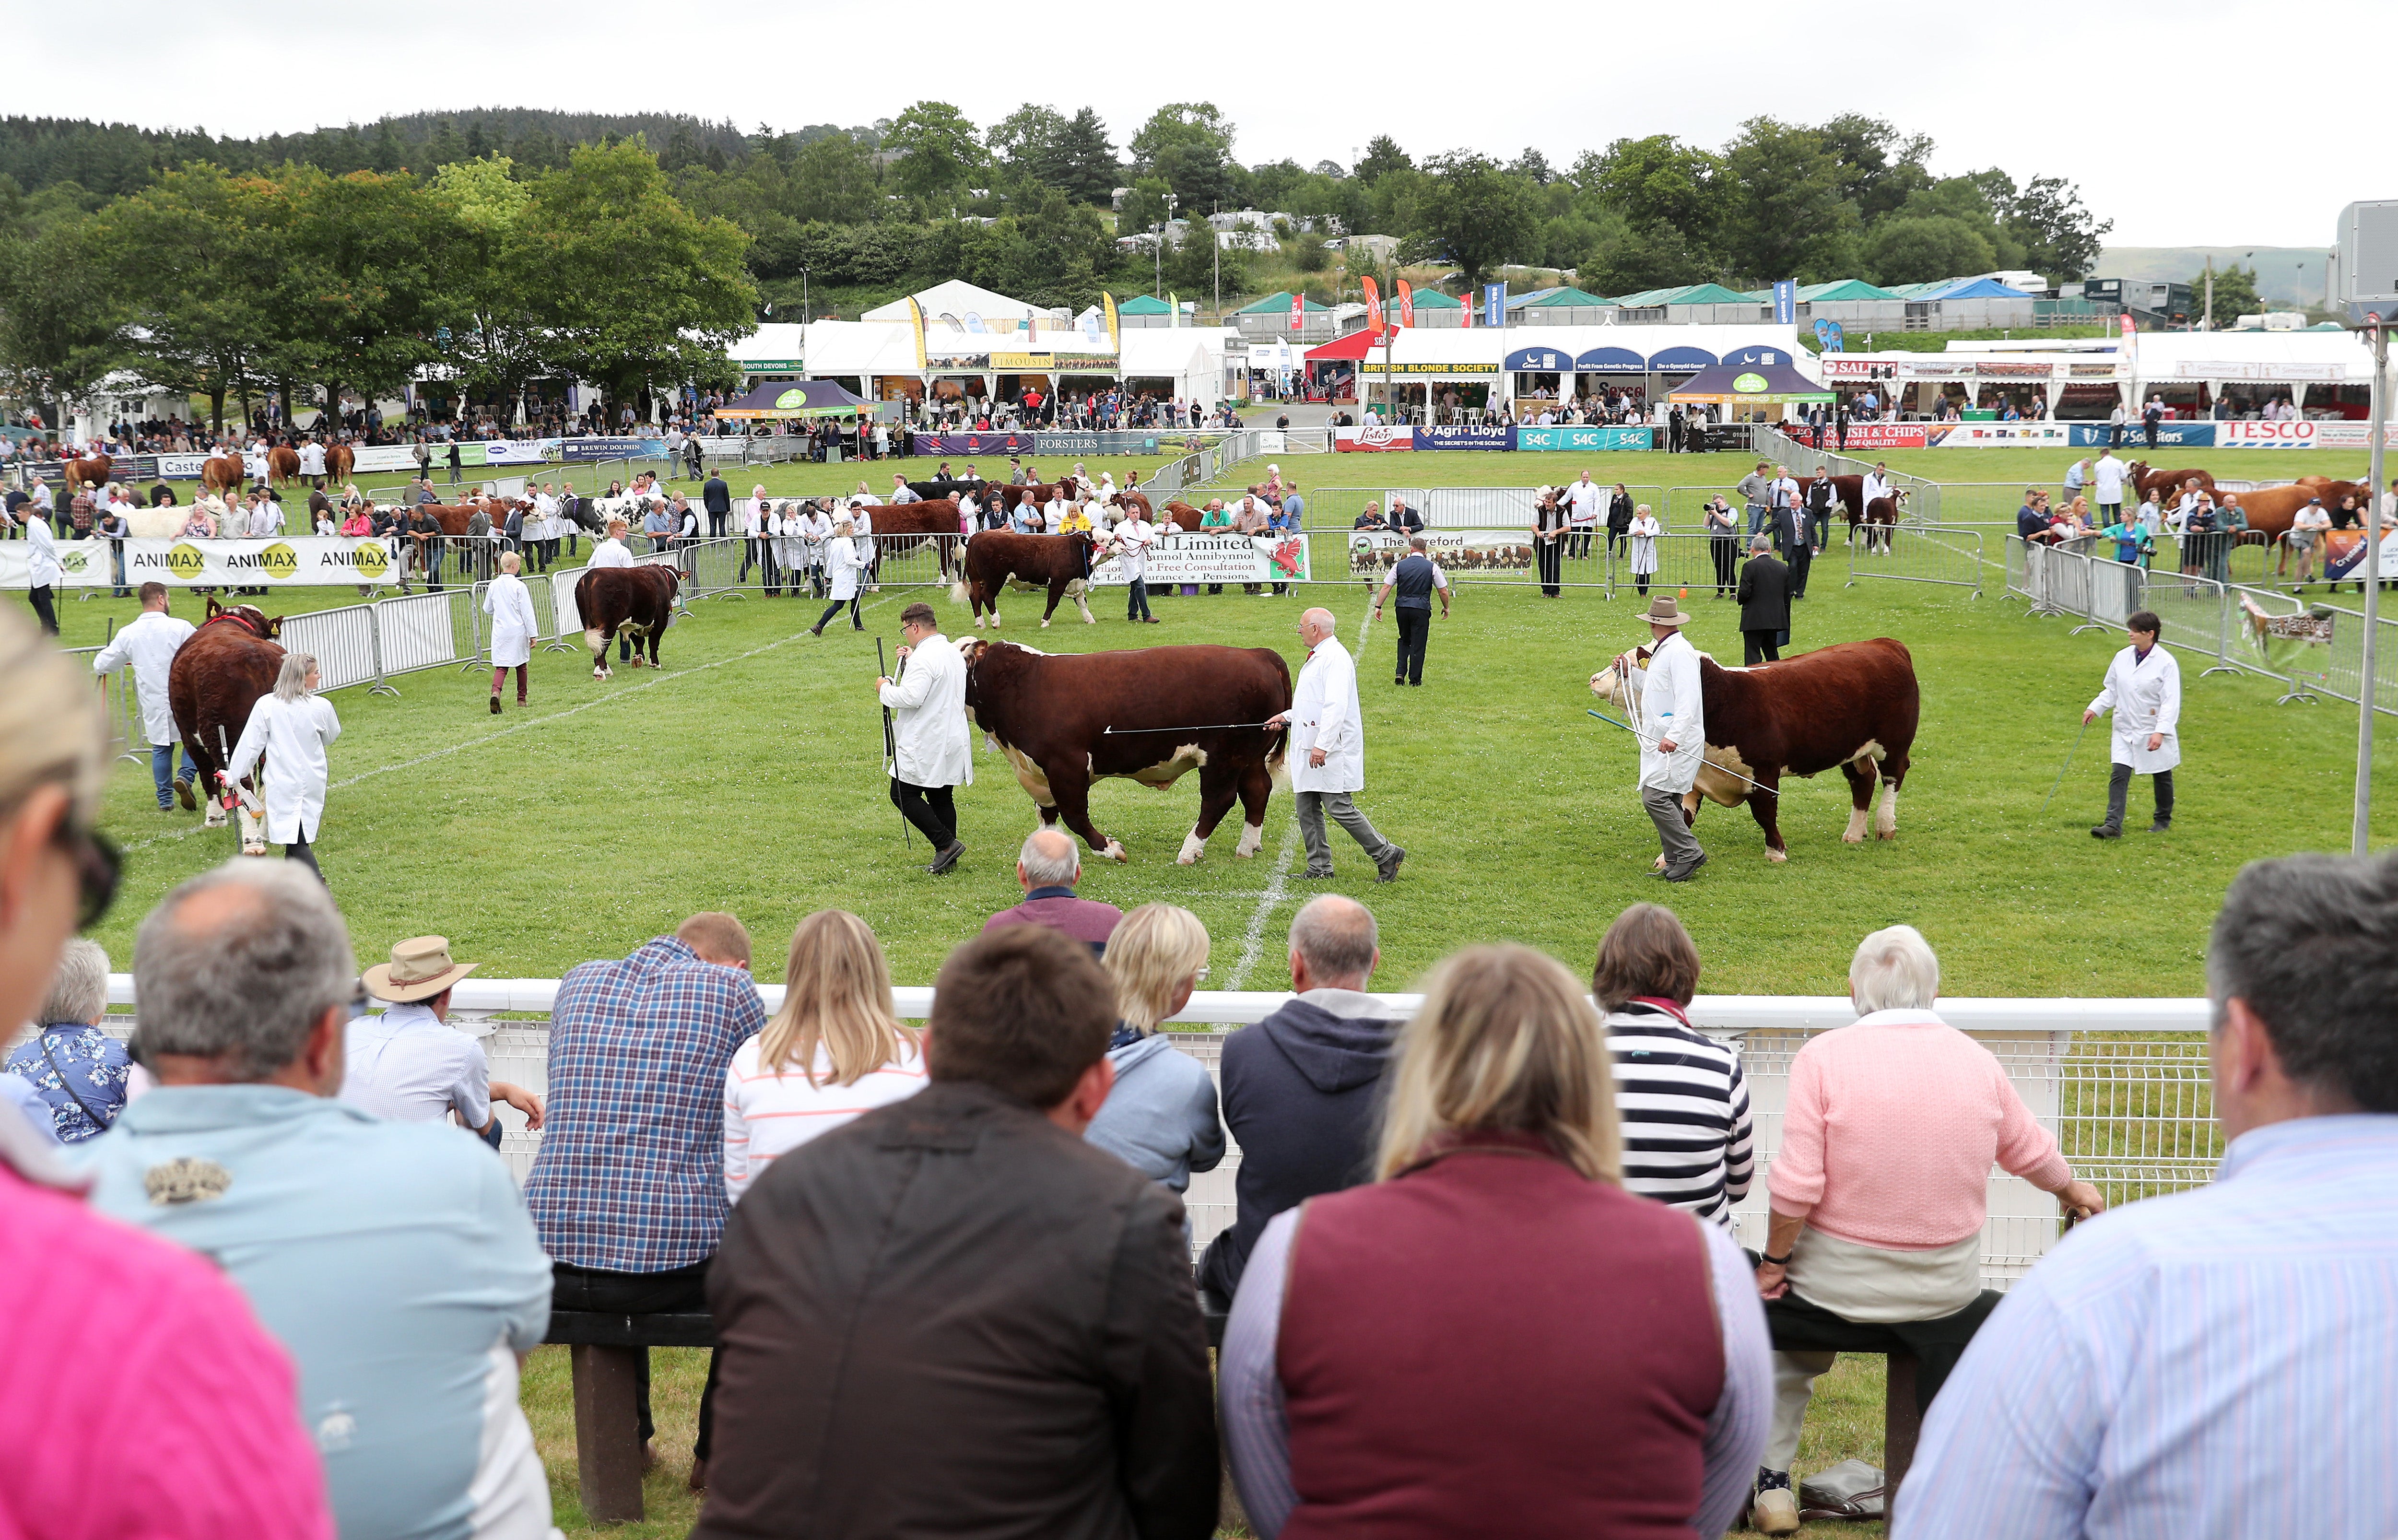 The UK’s biggest agricultural show will attract crowds on one of the hottest days recorded in Wales